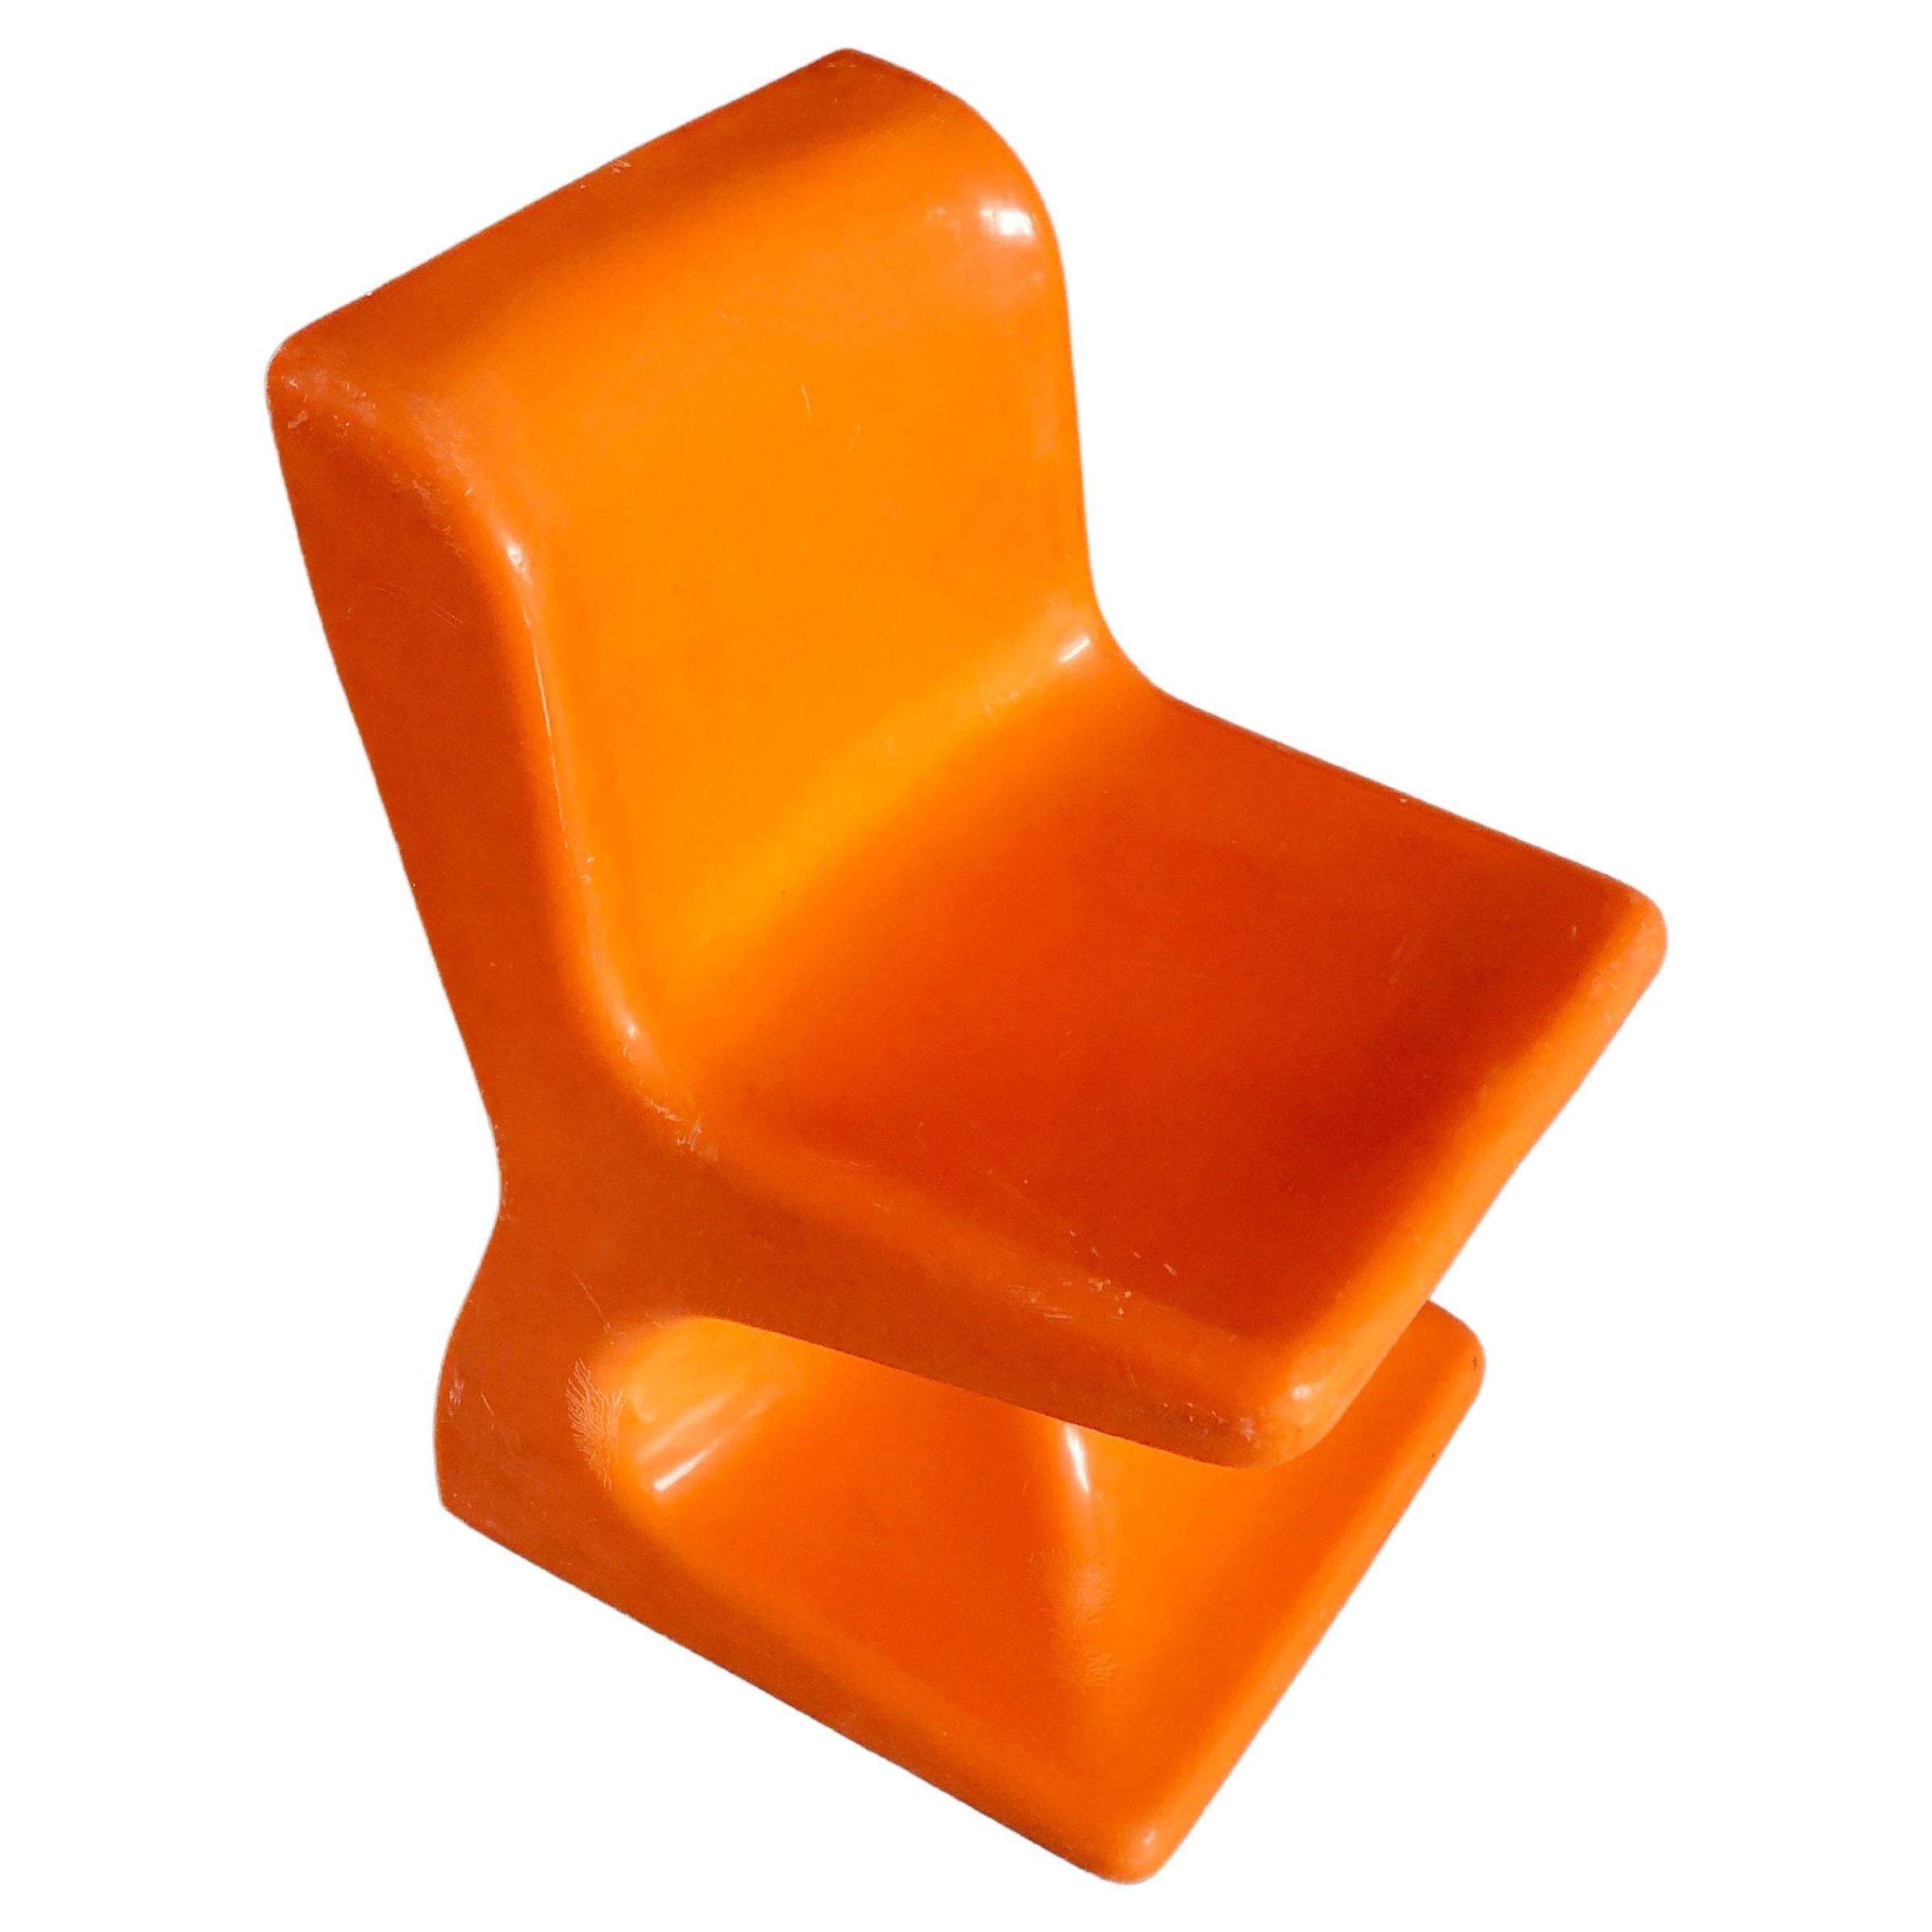 Patrick Gingembre - child chair Space Age 70’s manufactured by S.e.l.a.p. France For Sale